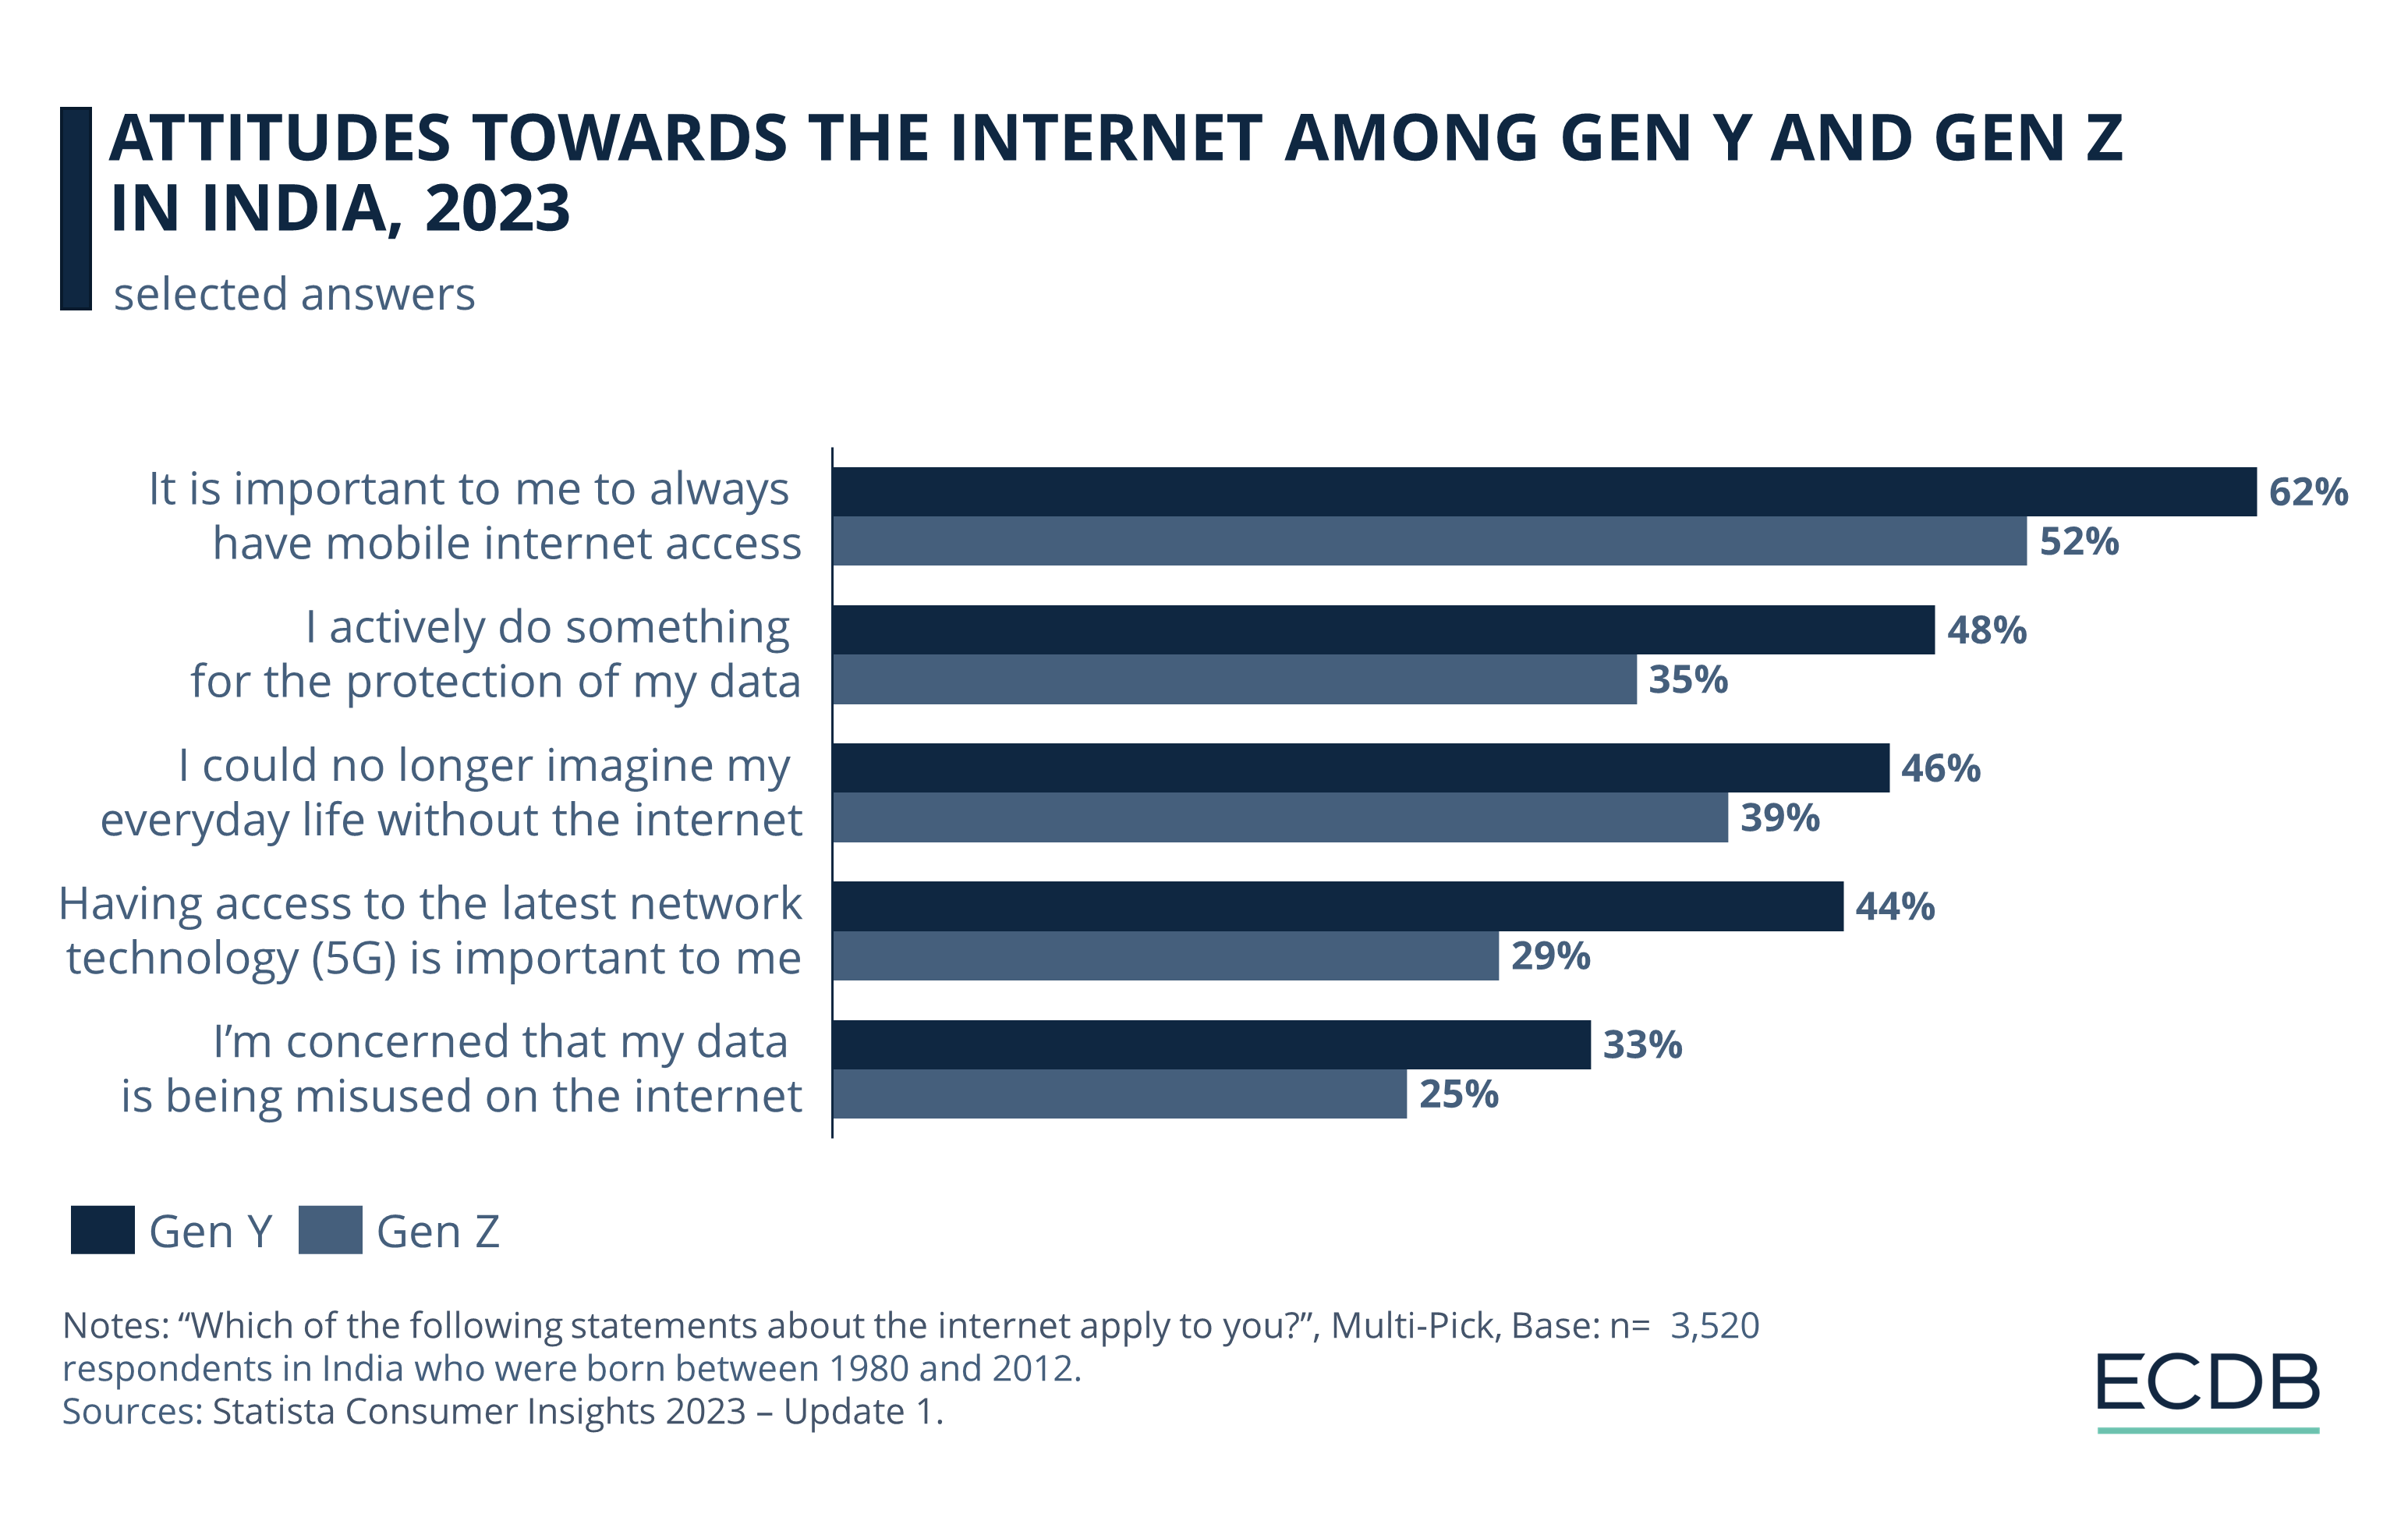 Attitudes Towards the Internet Among Gen Y and Gen Z in India, 2023